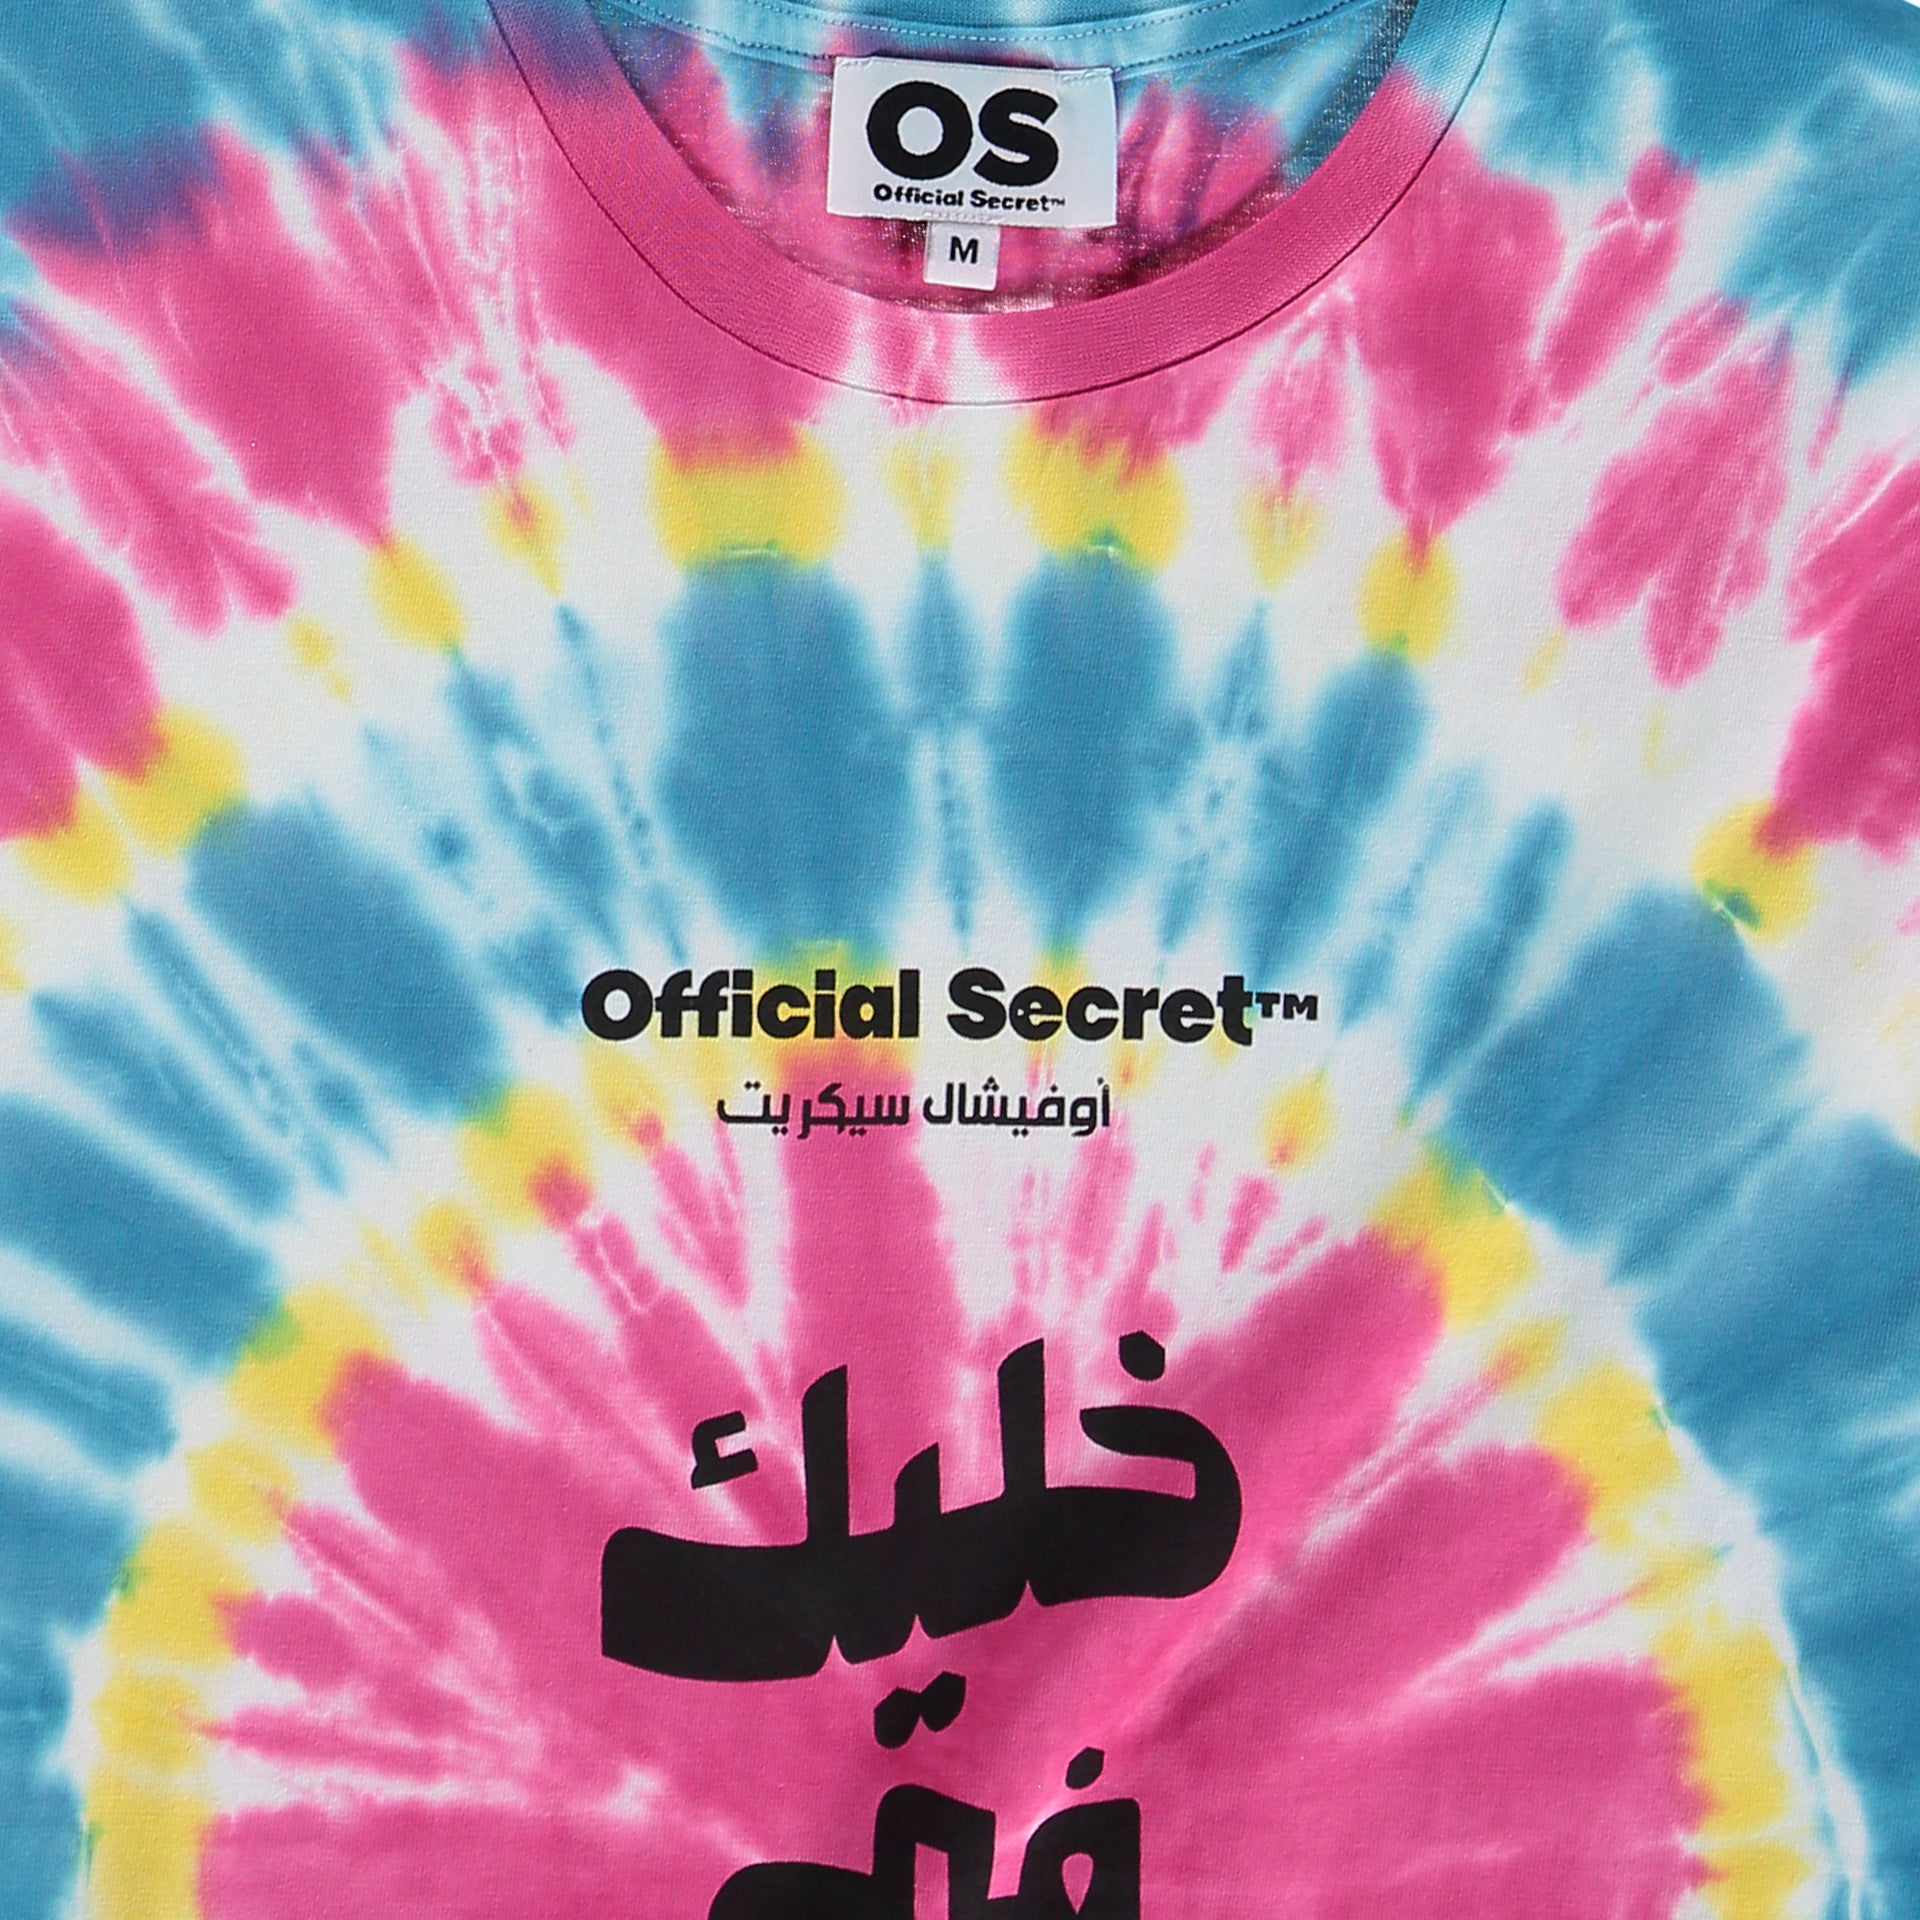 Pink Tie & Dye Pink Stay Away 100% Cotton T-Shirt From Official Secret